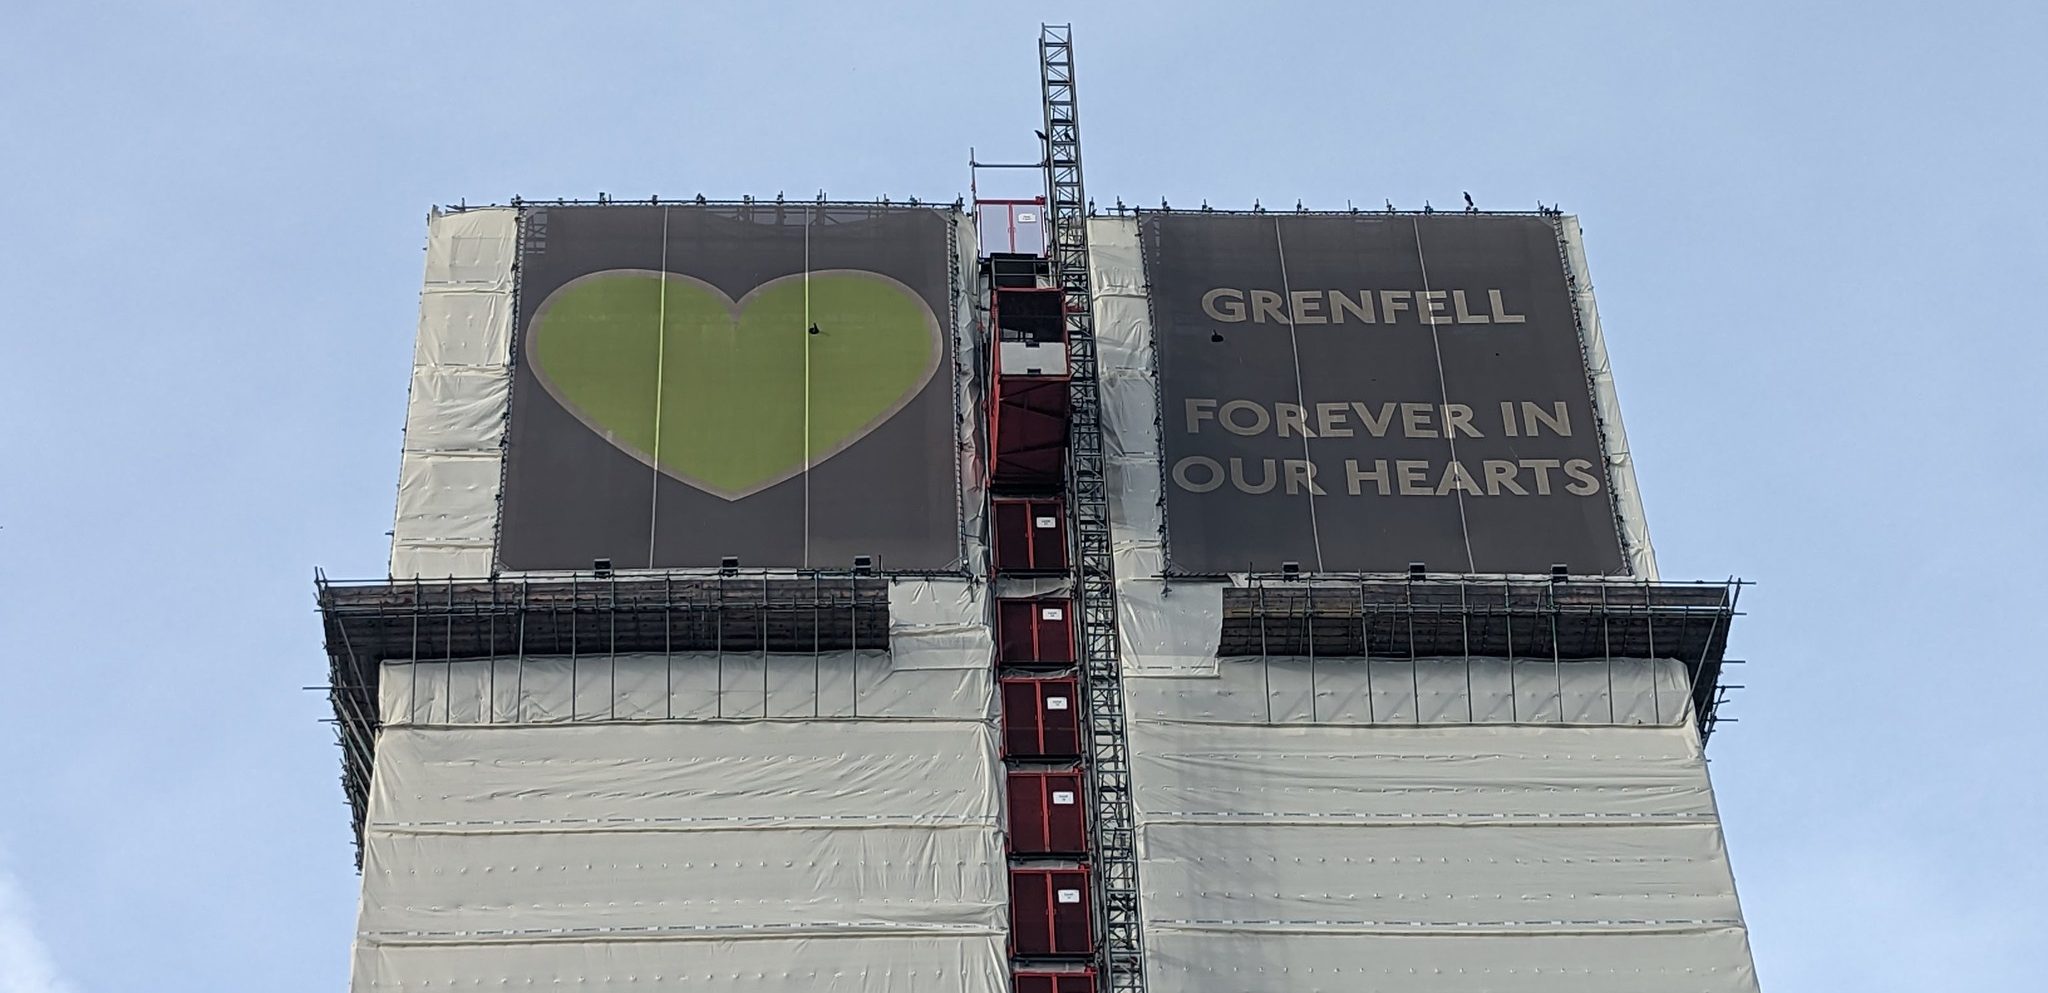 Grenfell Tower draped in memorial green heart and text "Grenfell: forever in our hearts".